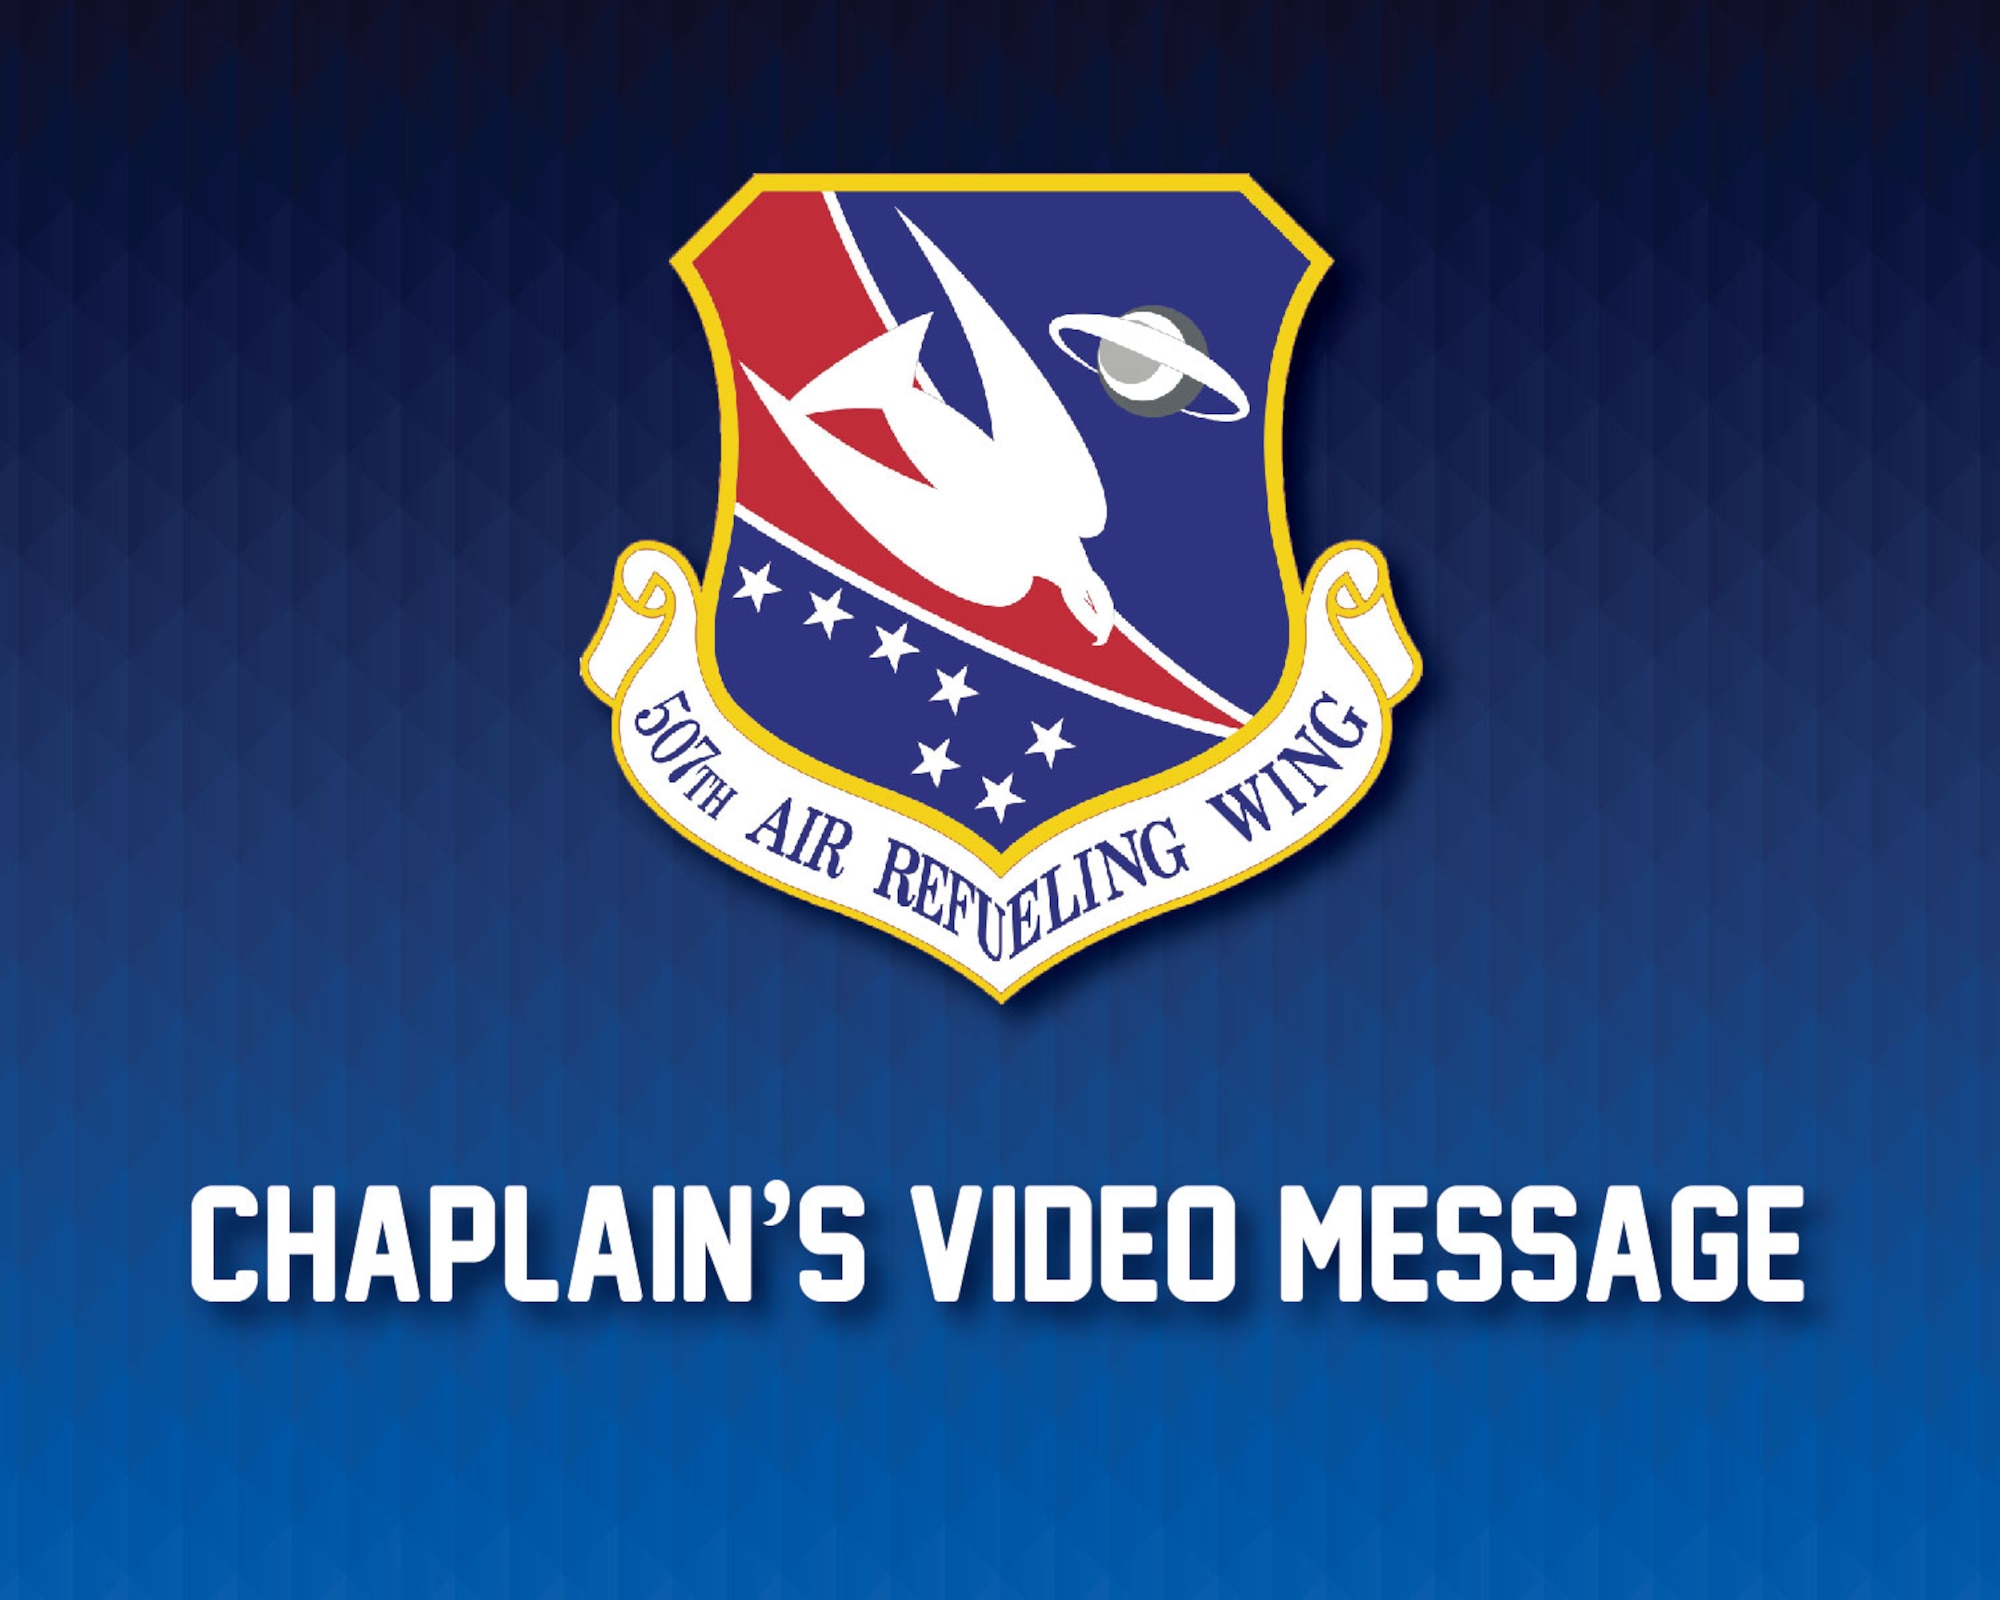 Ch. (Maj.) Ed Sanders, 507th Air Refueling Wing chaplain, offers a message of resiliency to the Wing's Airmen April 9, 2020, at Tinker Air Force Base, Oklahoma. (U.S. Air Force graphic by Senior Airman Mary Begy)